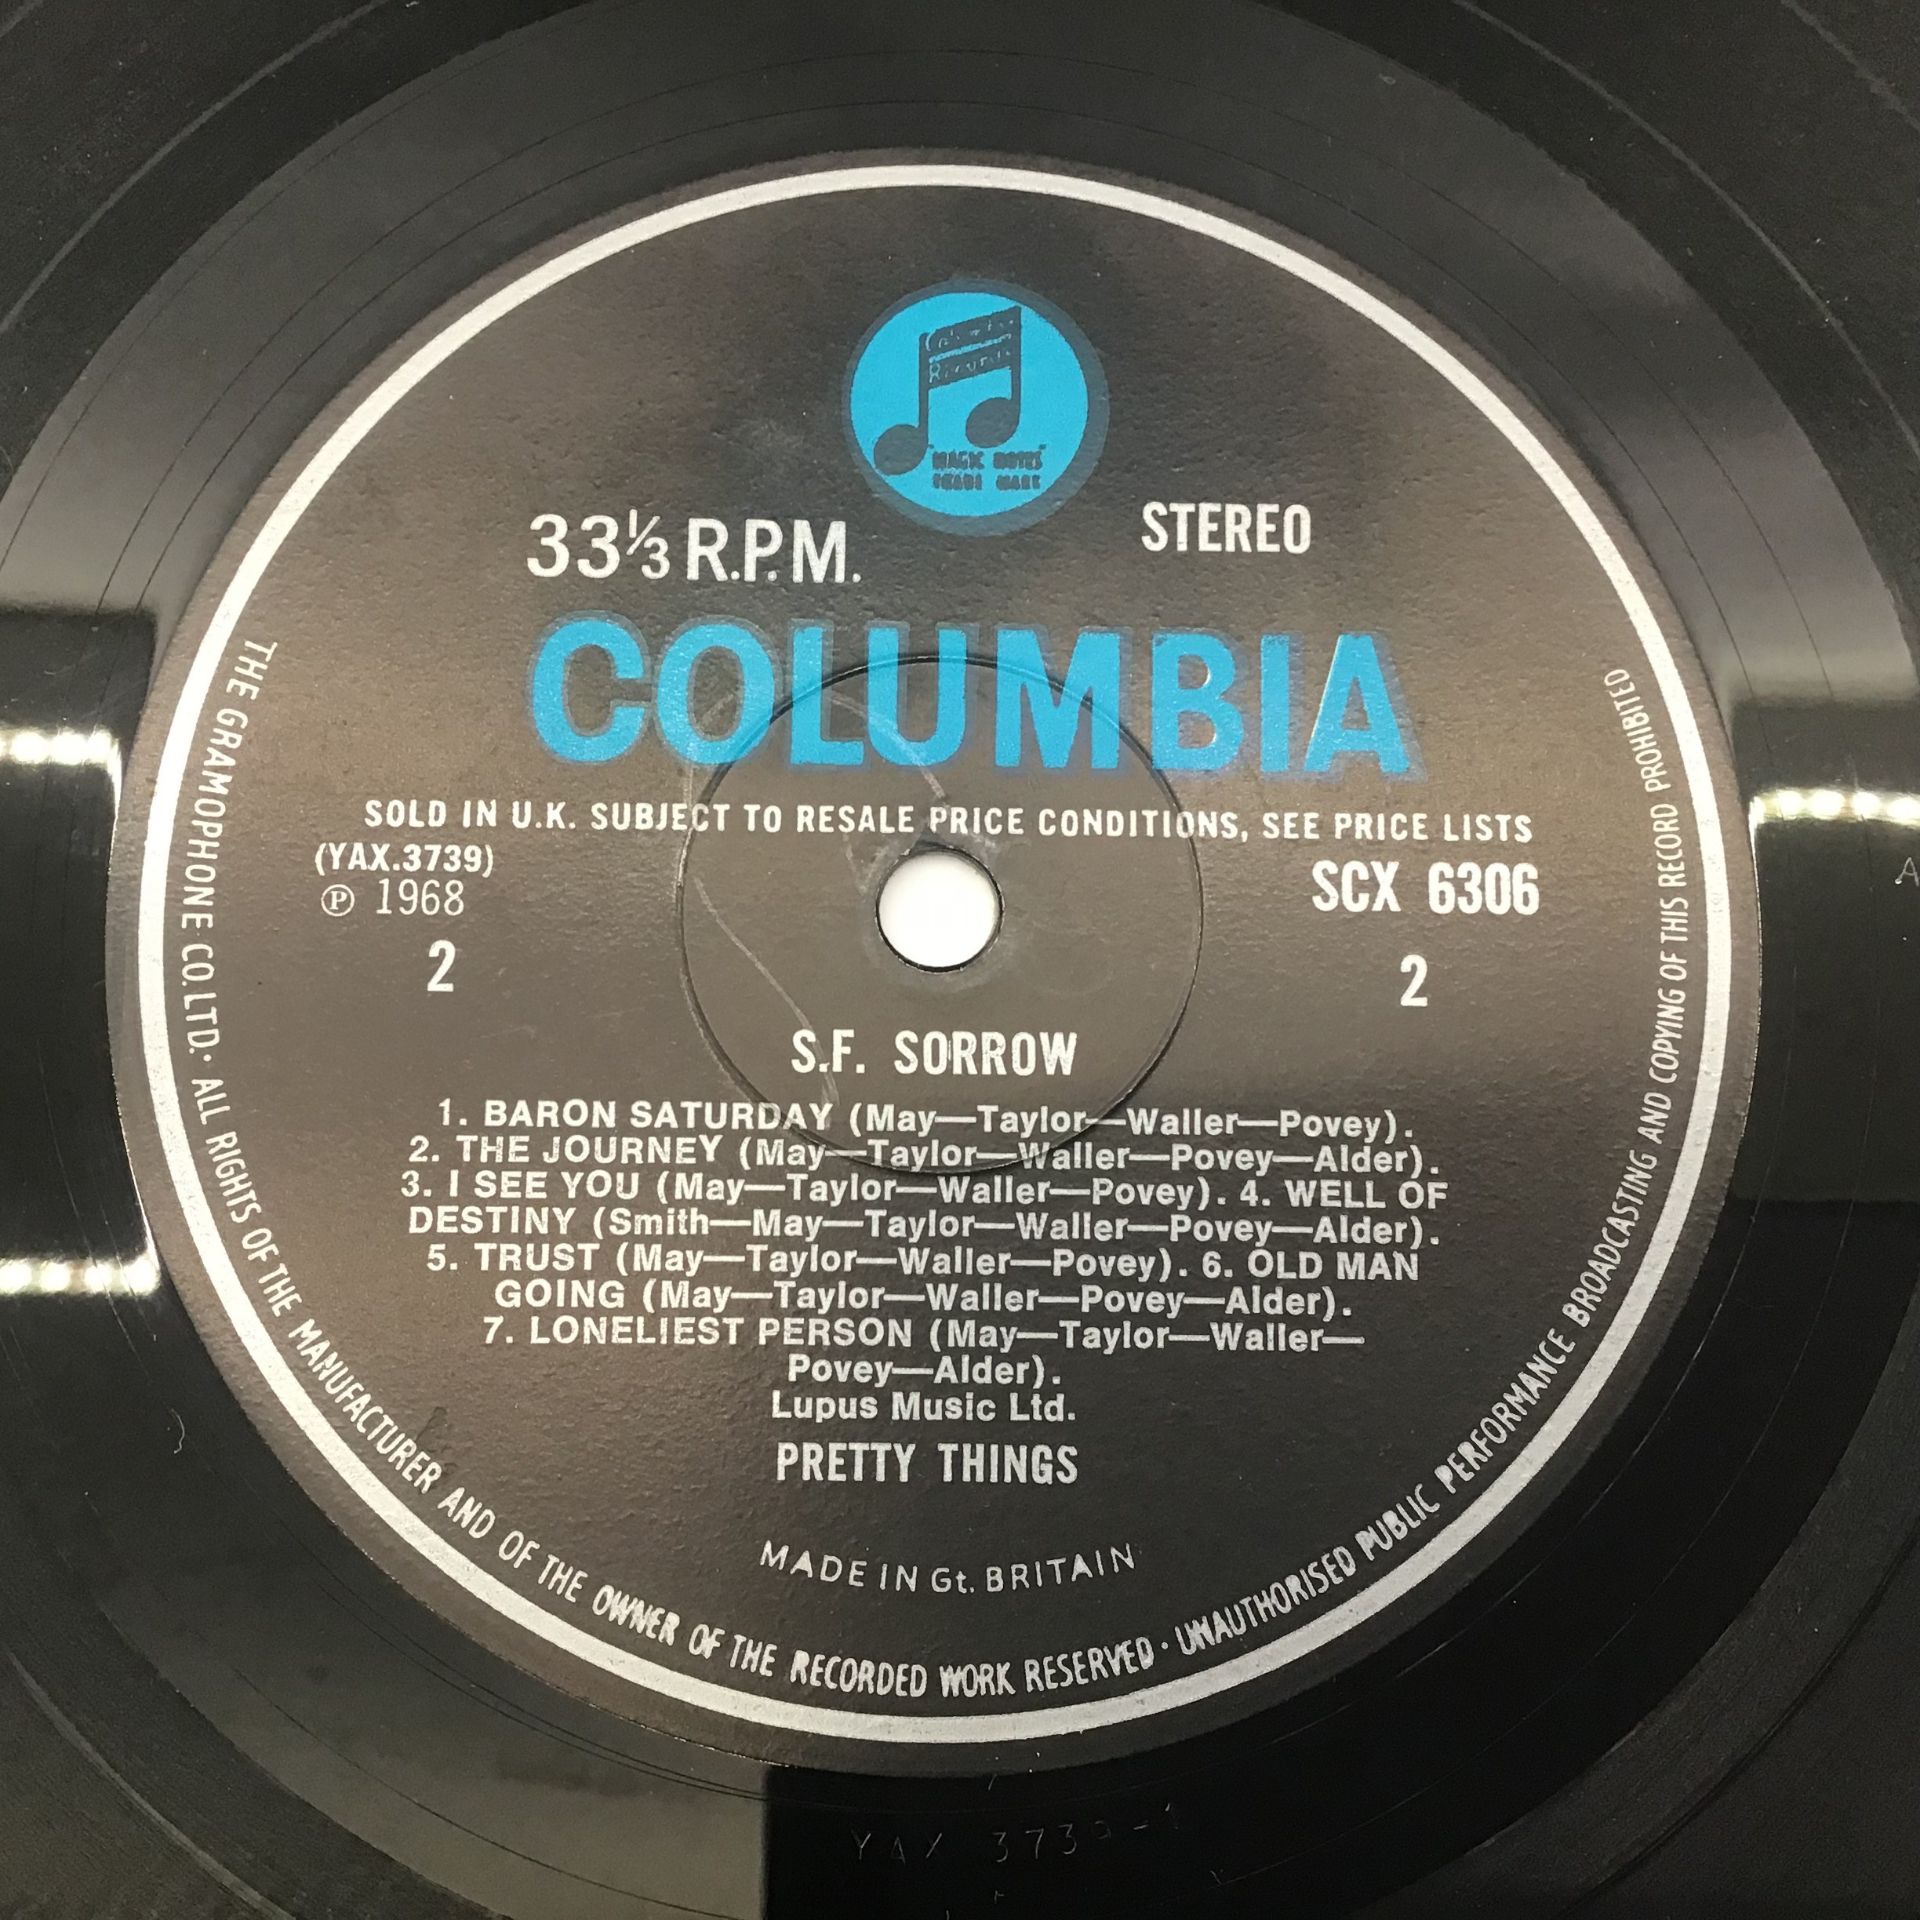 PRETTY THINGS ‘S.F. SORROW’ LP RECORD. Pressed here on Columbia Records from 1968. This stereo - Image 8 of 10